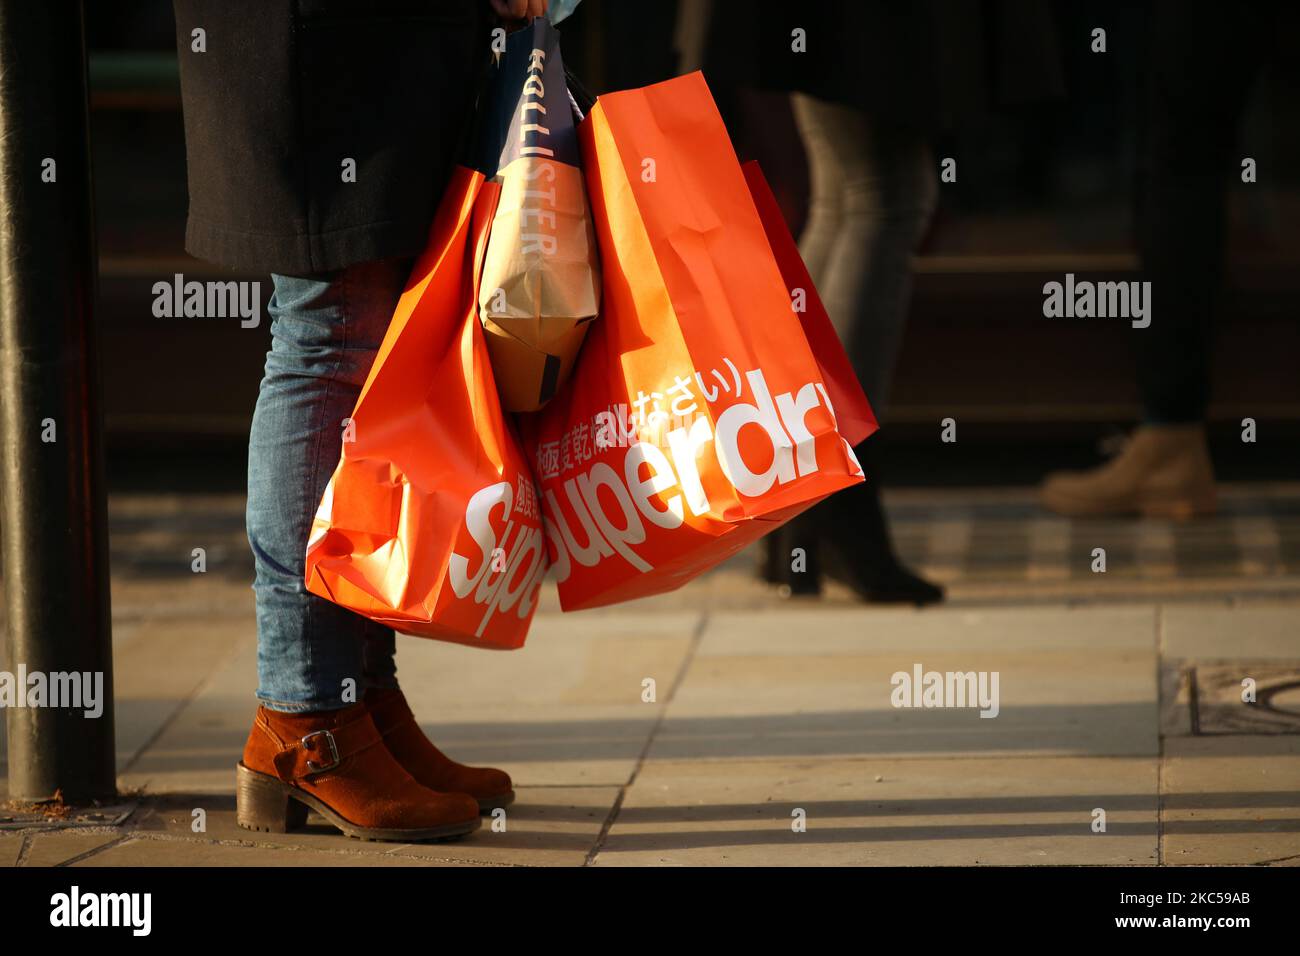 A shopper stands with bags from clothing retailers Superdry and Hollister on Maddox Street in London, England, on December 5, 2020. London has returned to so-called Tier 2 or 'high alert' coronavirus restrictions since the end of the four-week, England-wide lockdown last Wednesday, meaning a reopening of non-essential shops and hospitality businesses as the festive season gets underway. Rules under all three of England's tiers have been strengthened from before the November lockdown, however, with pubs and restaurants most severely impacted. In London's West End, meanwhile, Oxford Street and R Stock Photo